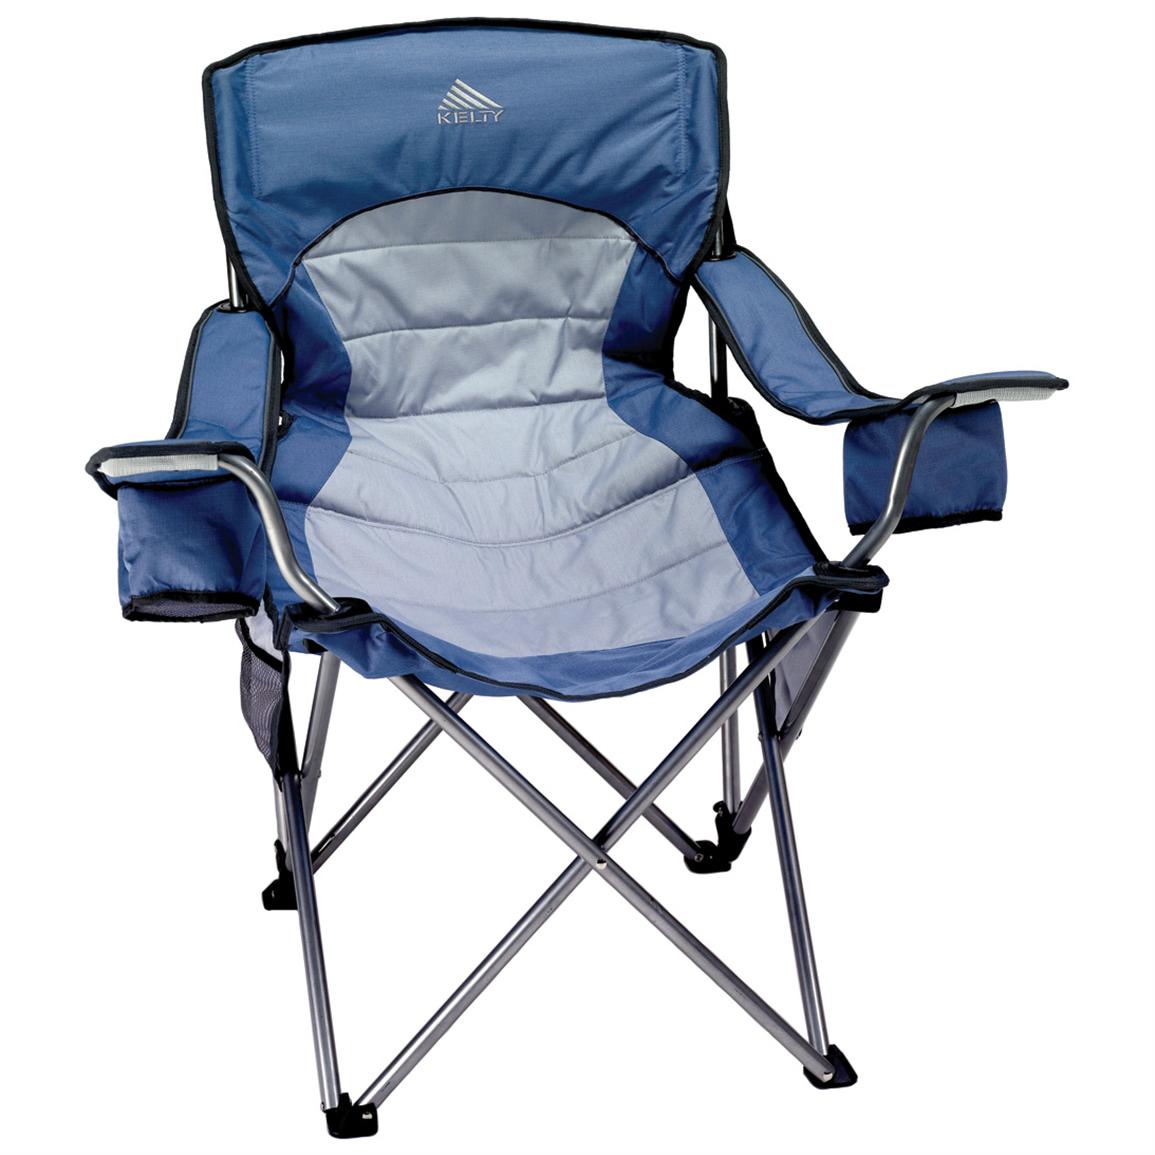 Kelty® Deluxe Lounge Chair - 132469, Patio Furniture at Sportsman's Guide